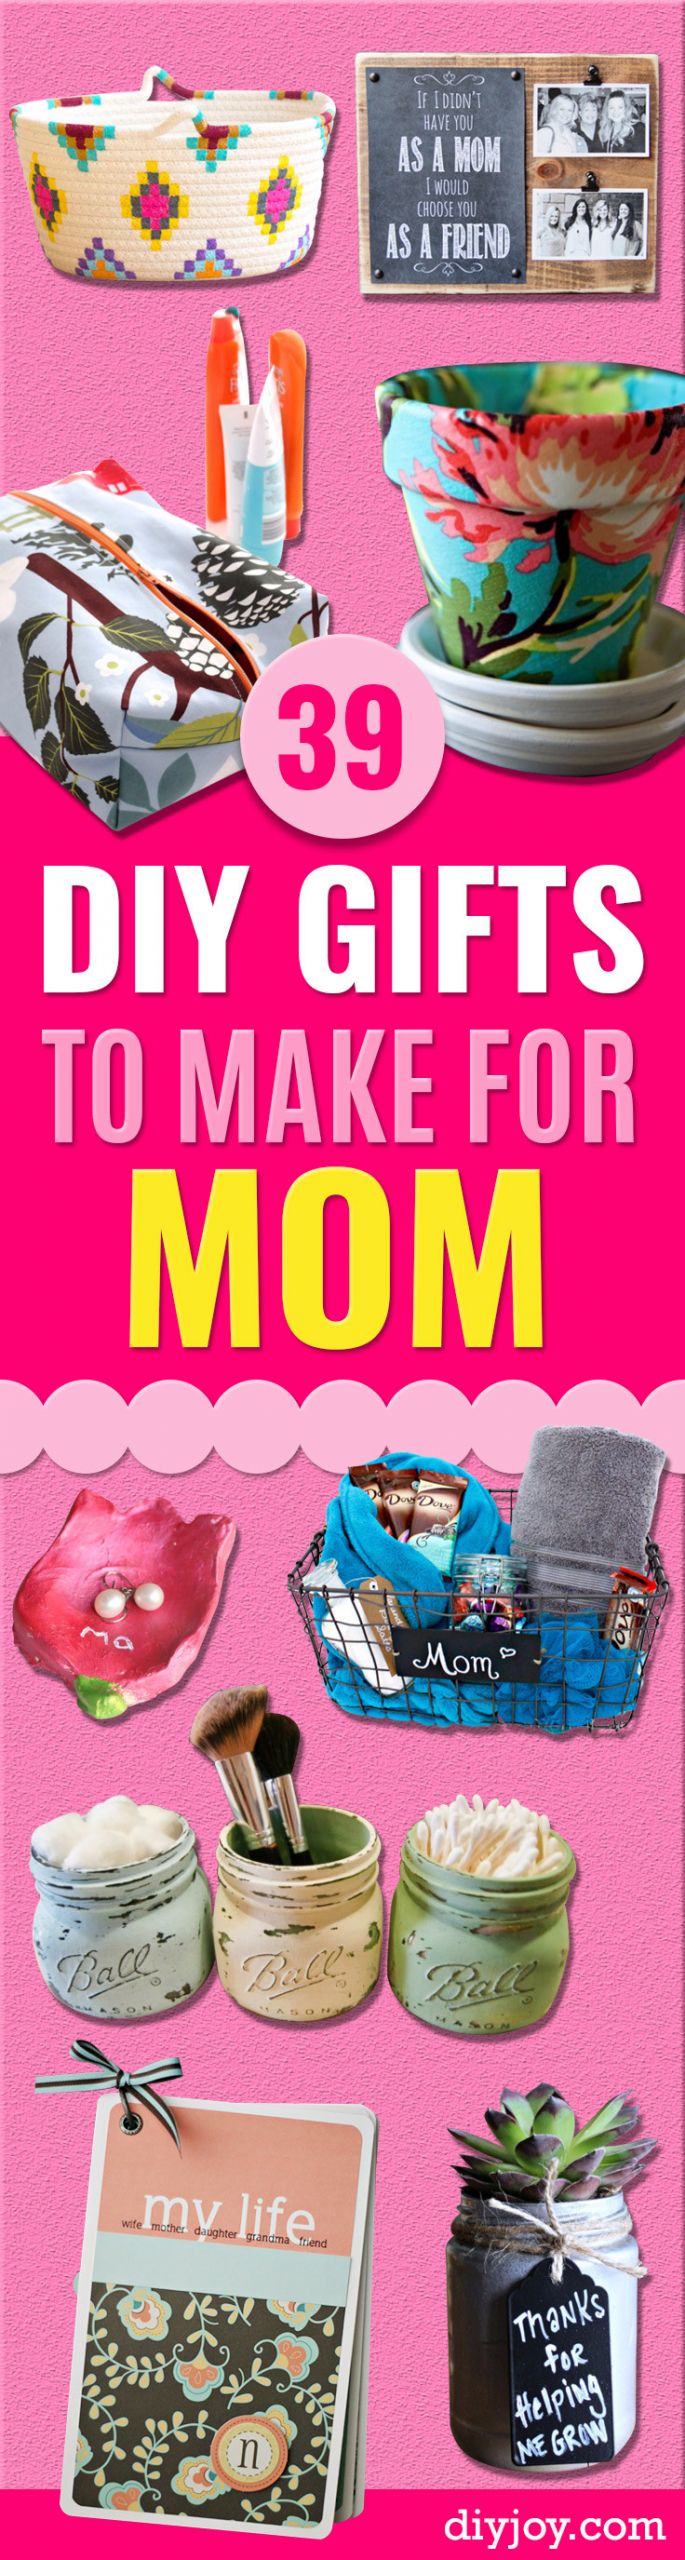 Birthday Gifts For Mom DIY
 39 Creative DIY Gifts to Make for Mom